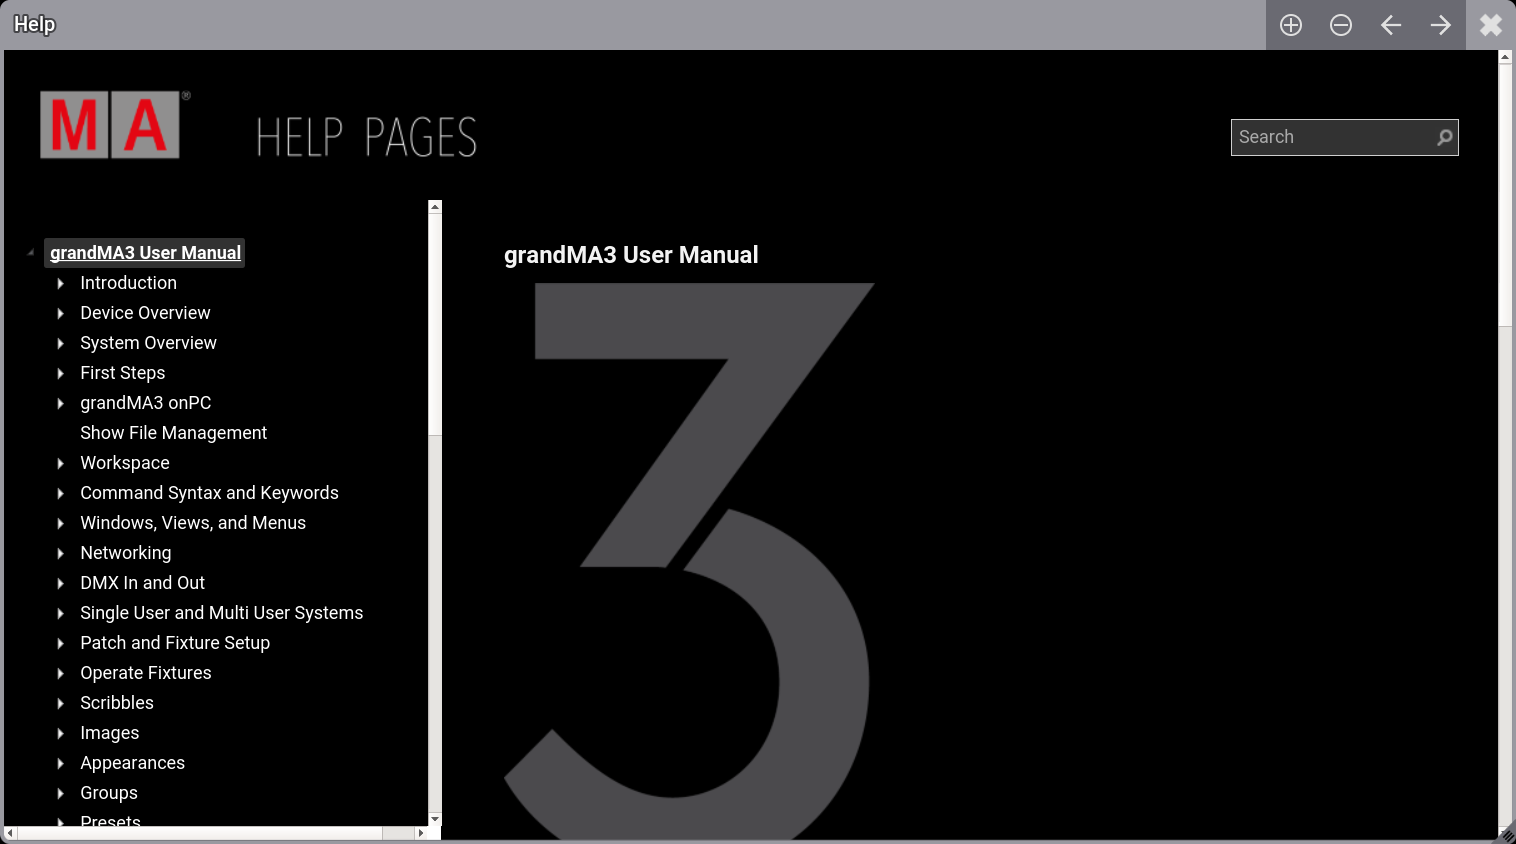 Appearances - grandMA3 Quick Start Guide - Help pages of MA Lighting  International GmbH